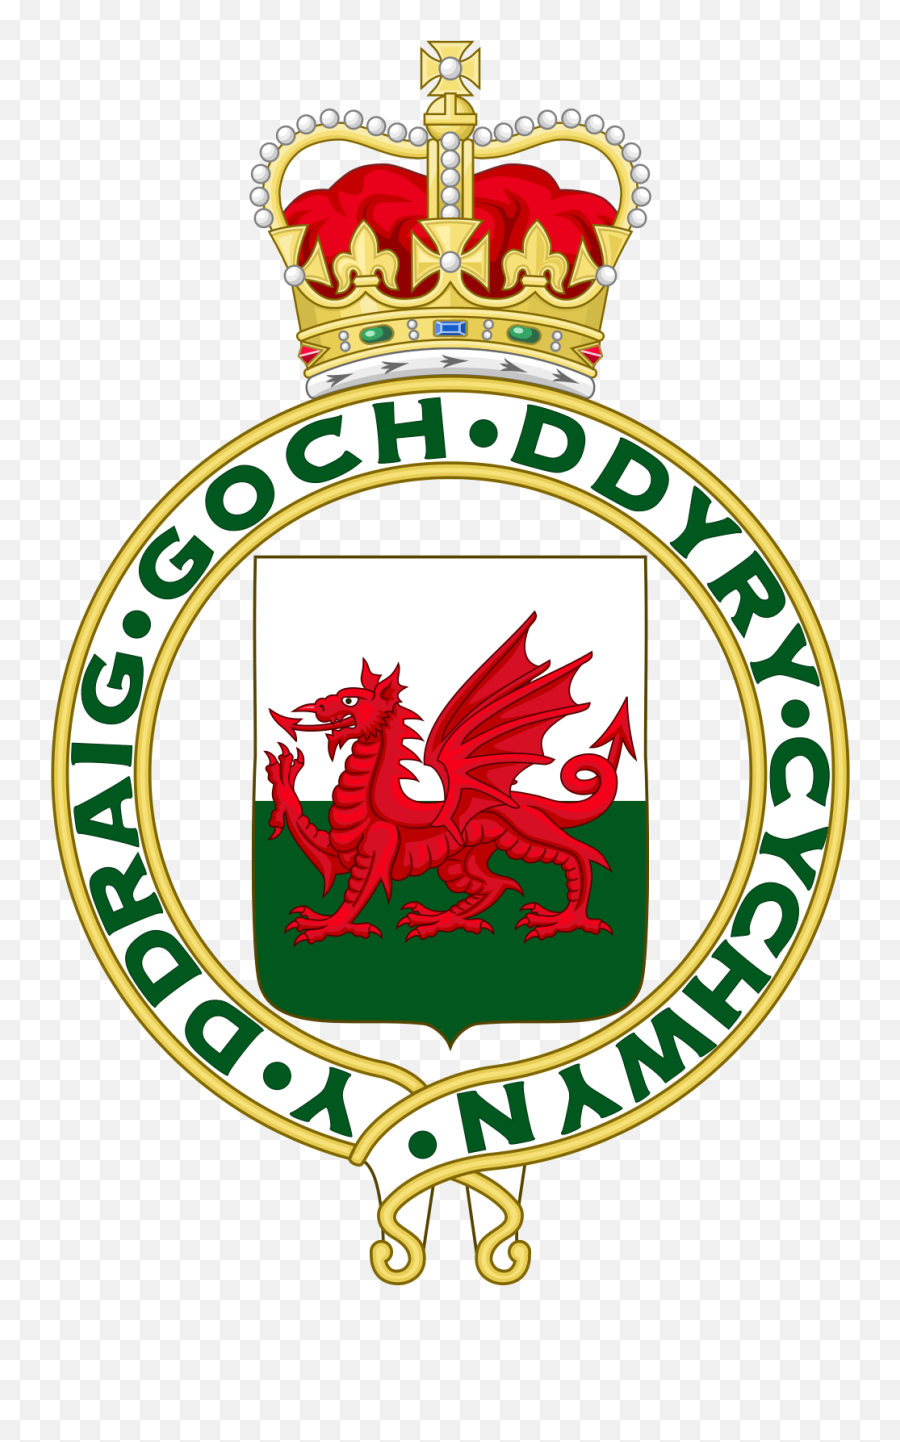 Is There A Welsh Flag Emoji - Royal Badge Of Wales,New Jersey Flag Emoji